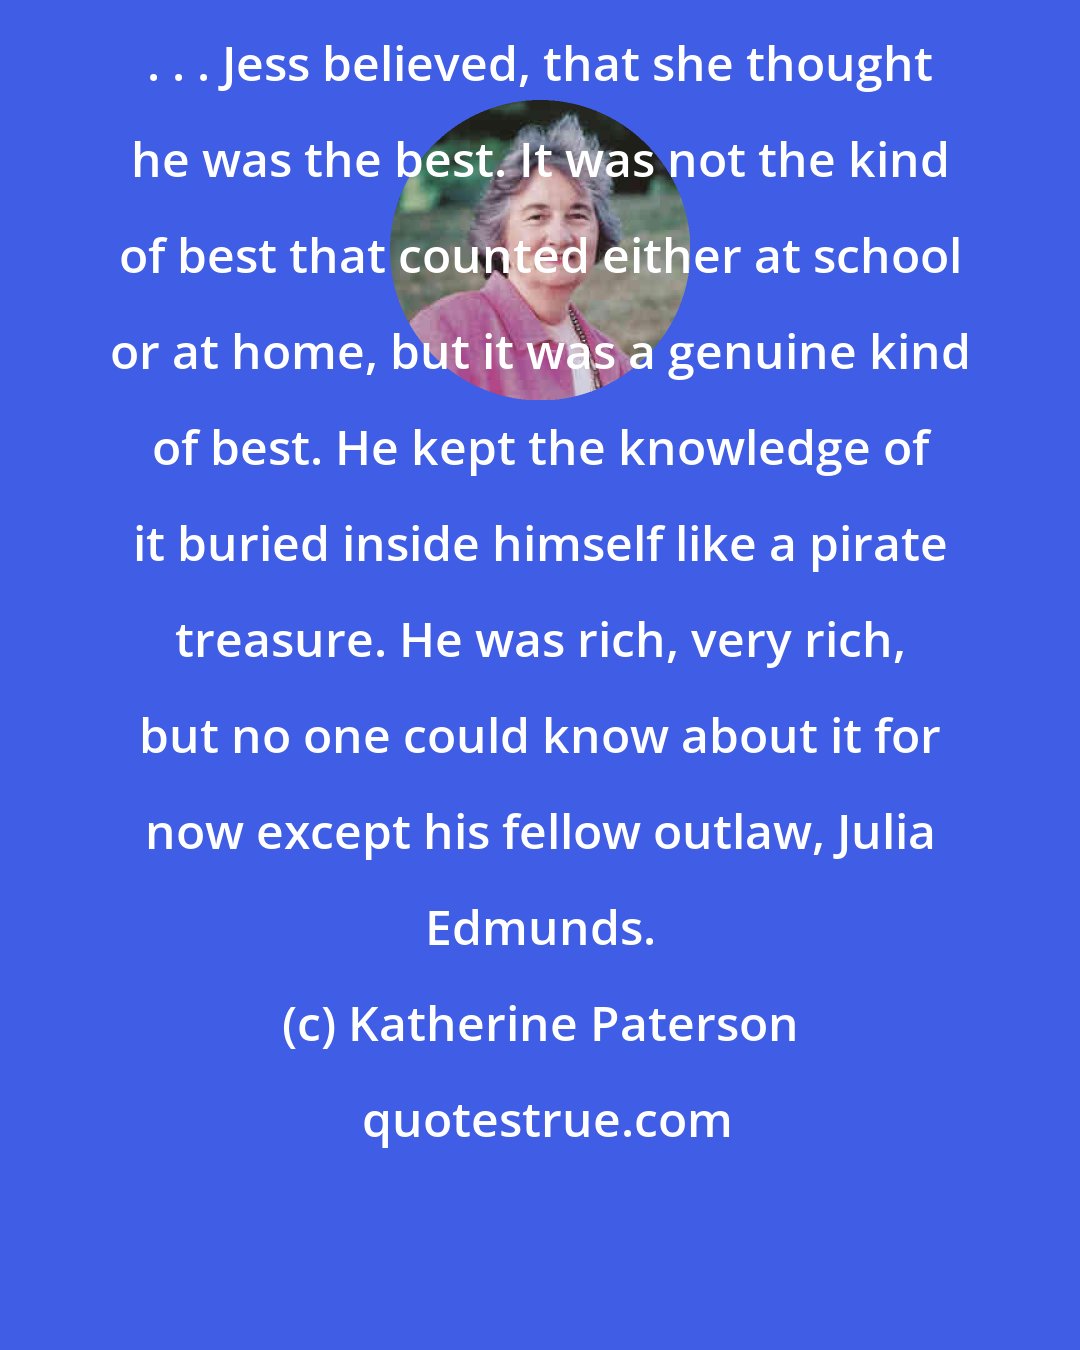 Katherine Paterson: . . . Jess believed, that she thought he was the best. It was not the kind of best that counted either at school or at home, but it was a genuine kind of best. He kept the knowledge of it buried inside himself like a pirate treasure. He was rich, very rich, but no one could know about it for now except his fellow outlaw, Julia Edmunds.